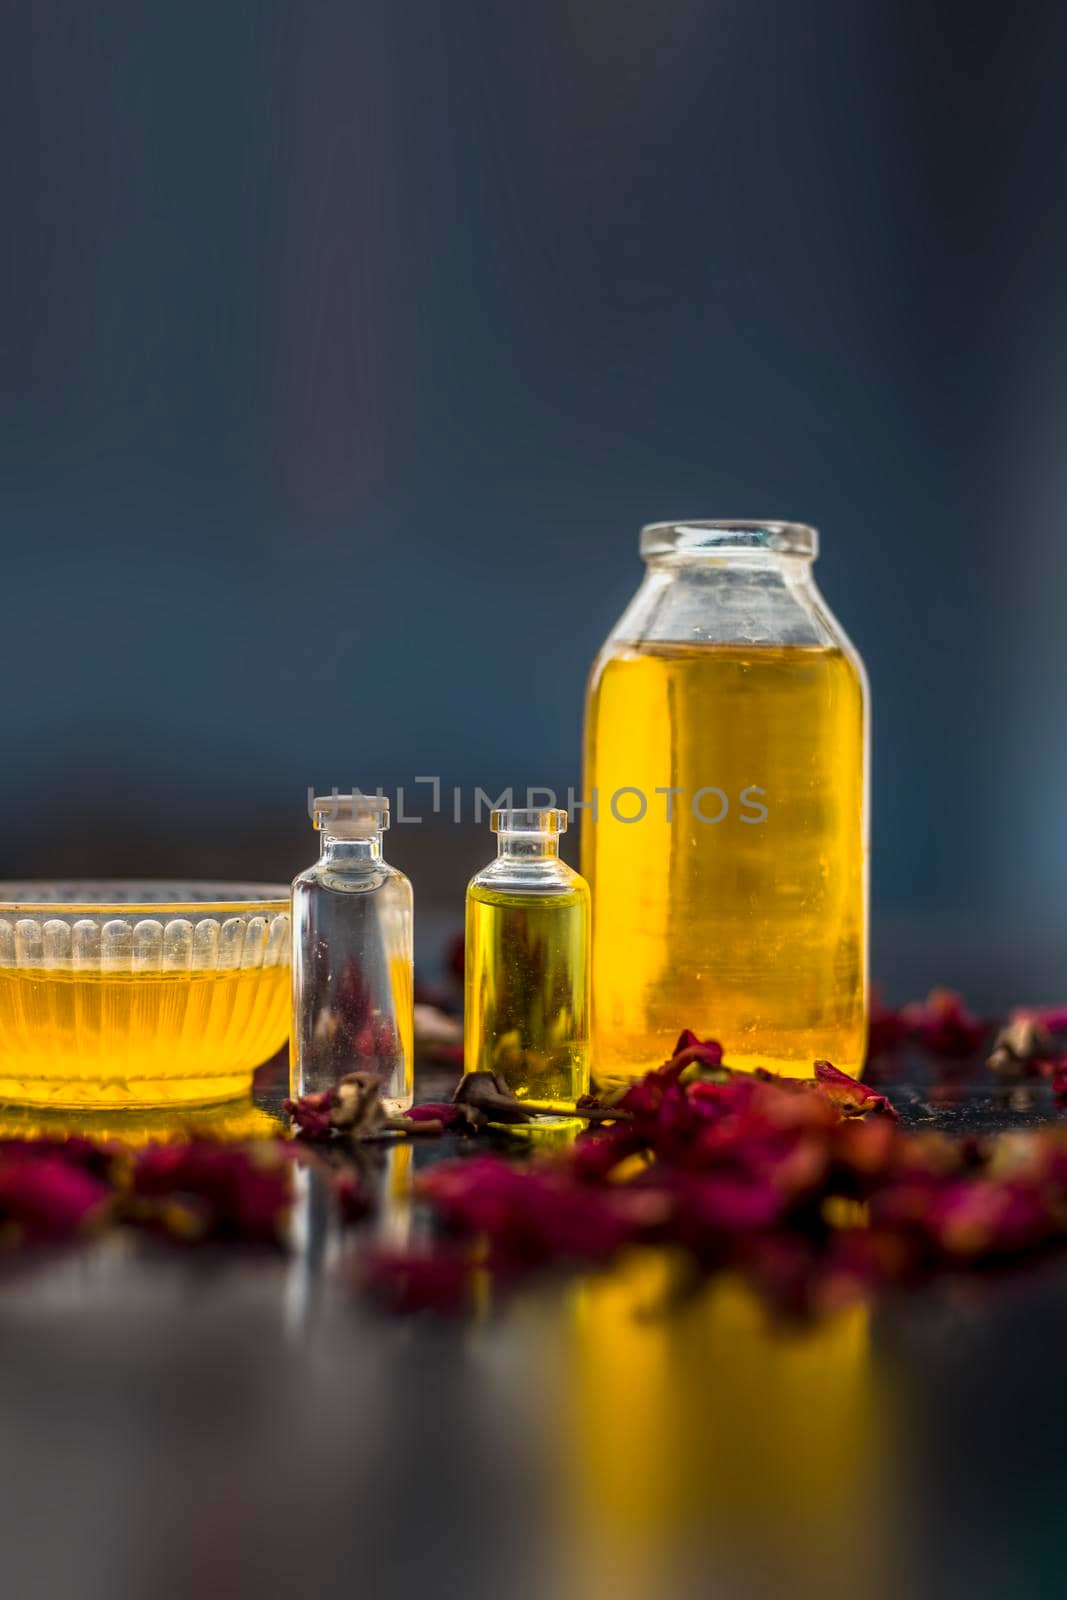 Close up of castor oil, tea tree oil, and some coconut oil in bottles on the wooden surface along with some raw honey and rose petals also present on the surface. by mirzamlk